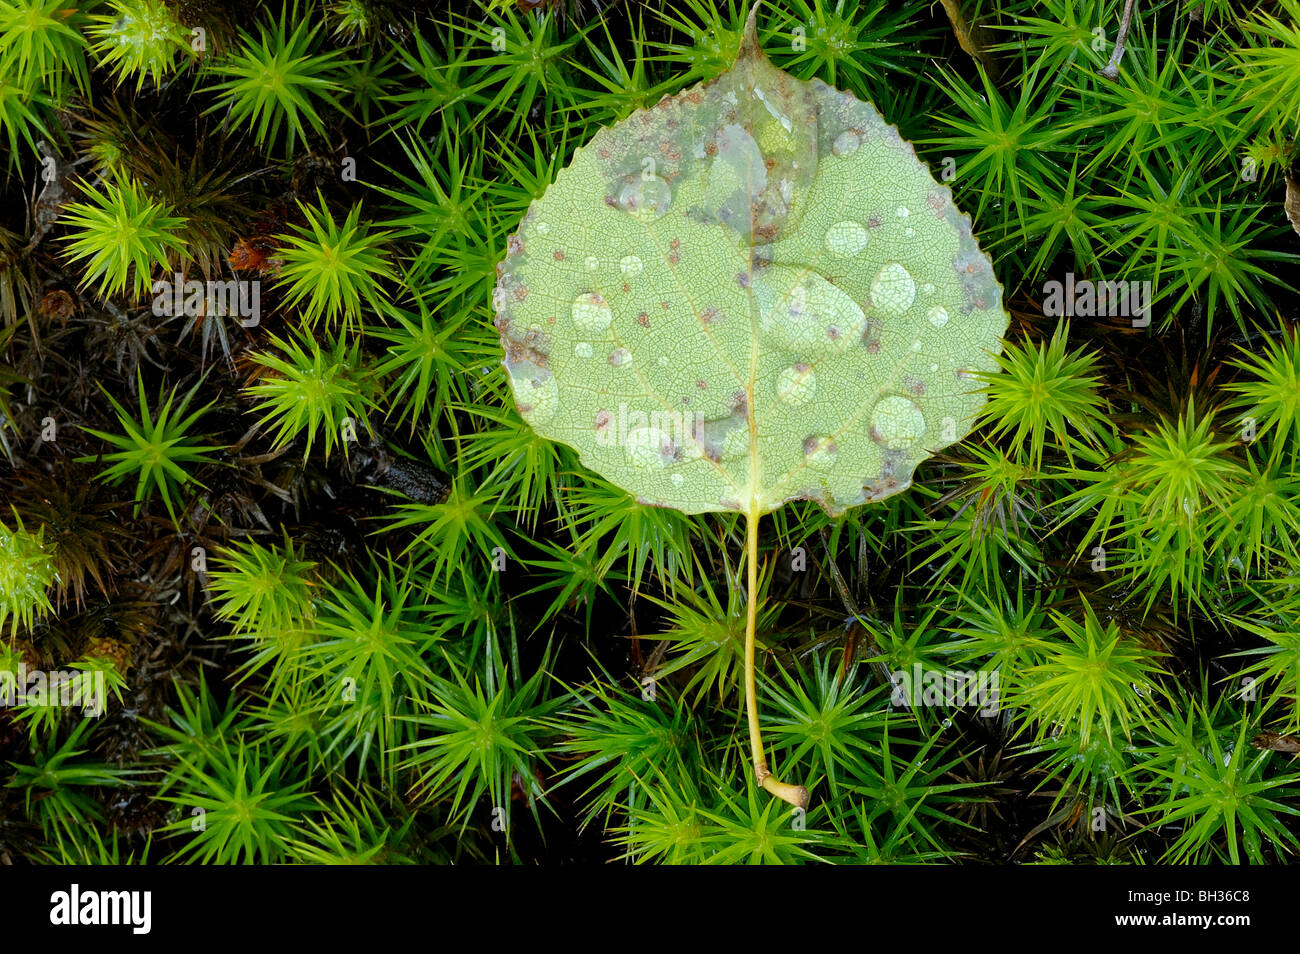 Raindrops clinging to fallen aspen leaf on bed of moss, Greater Sudbury, Ontario, Canada Stock Photo